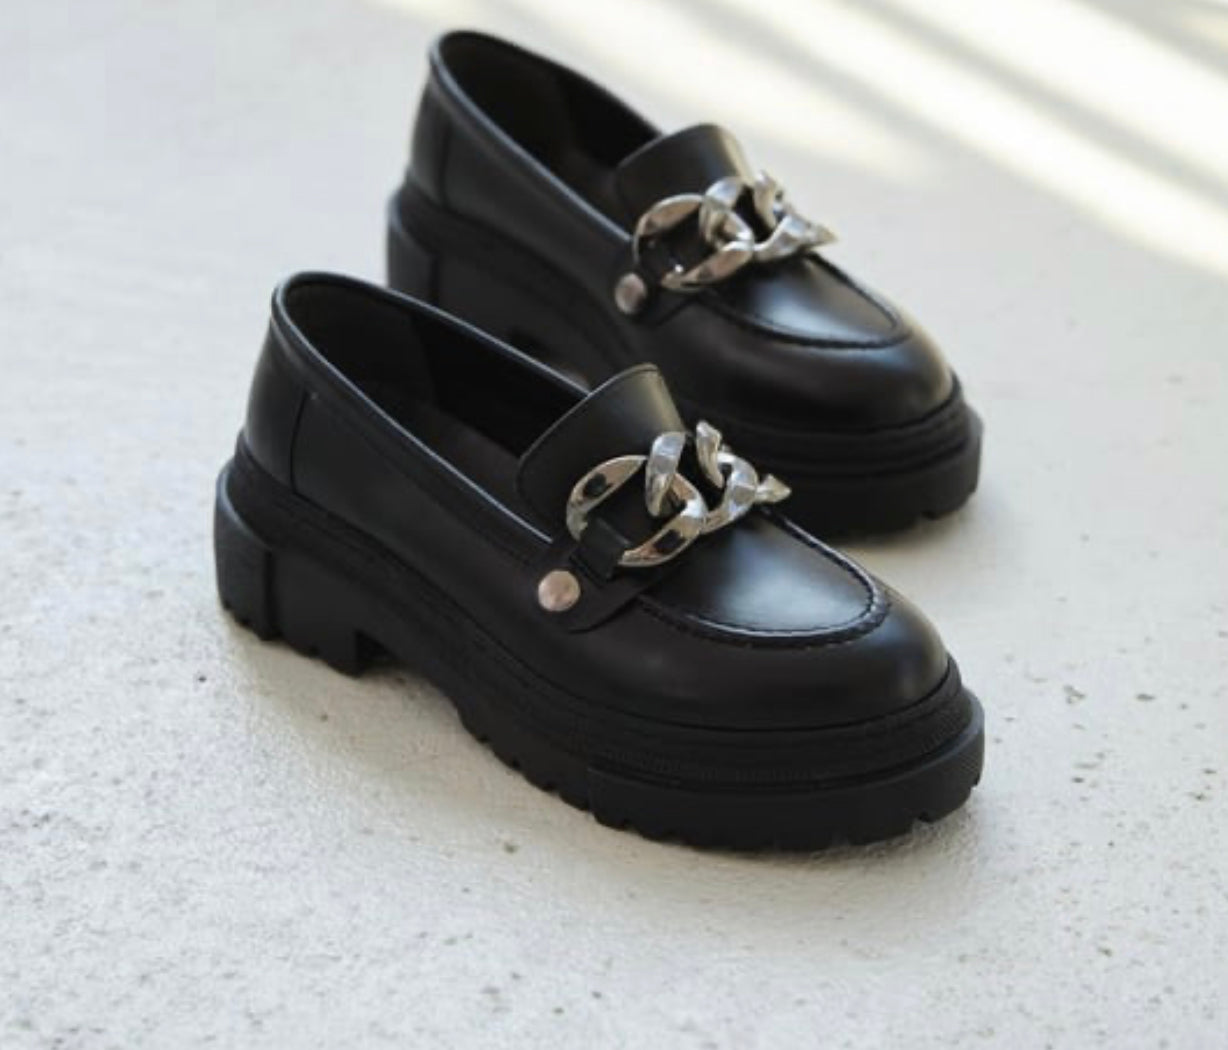 Chunky shoes with 3strap